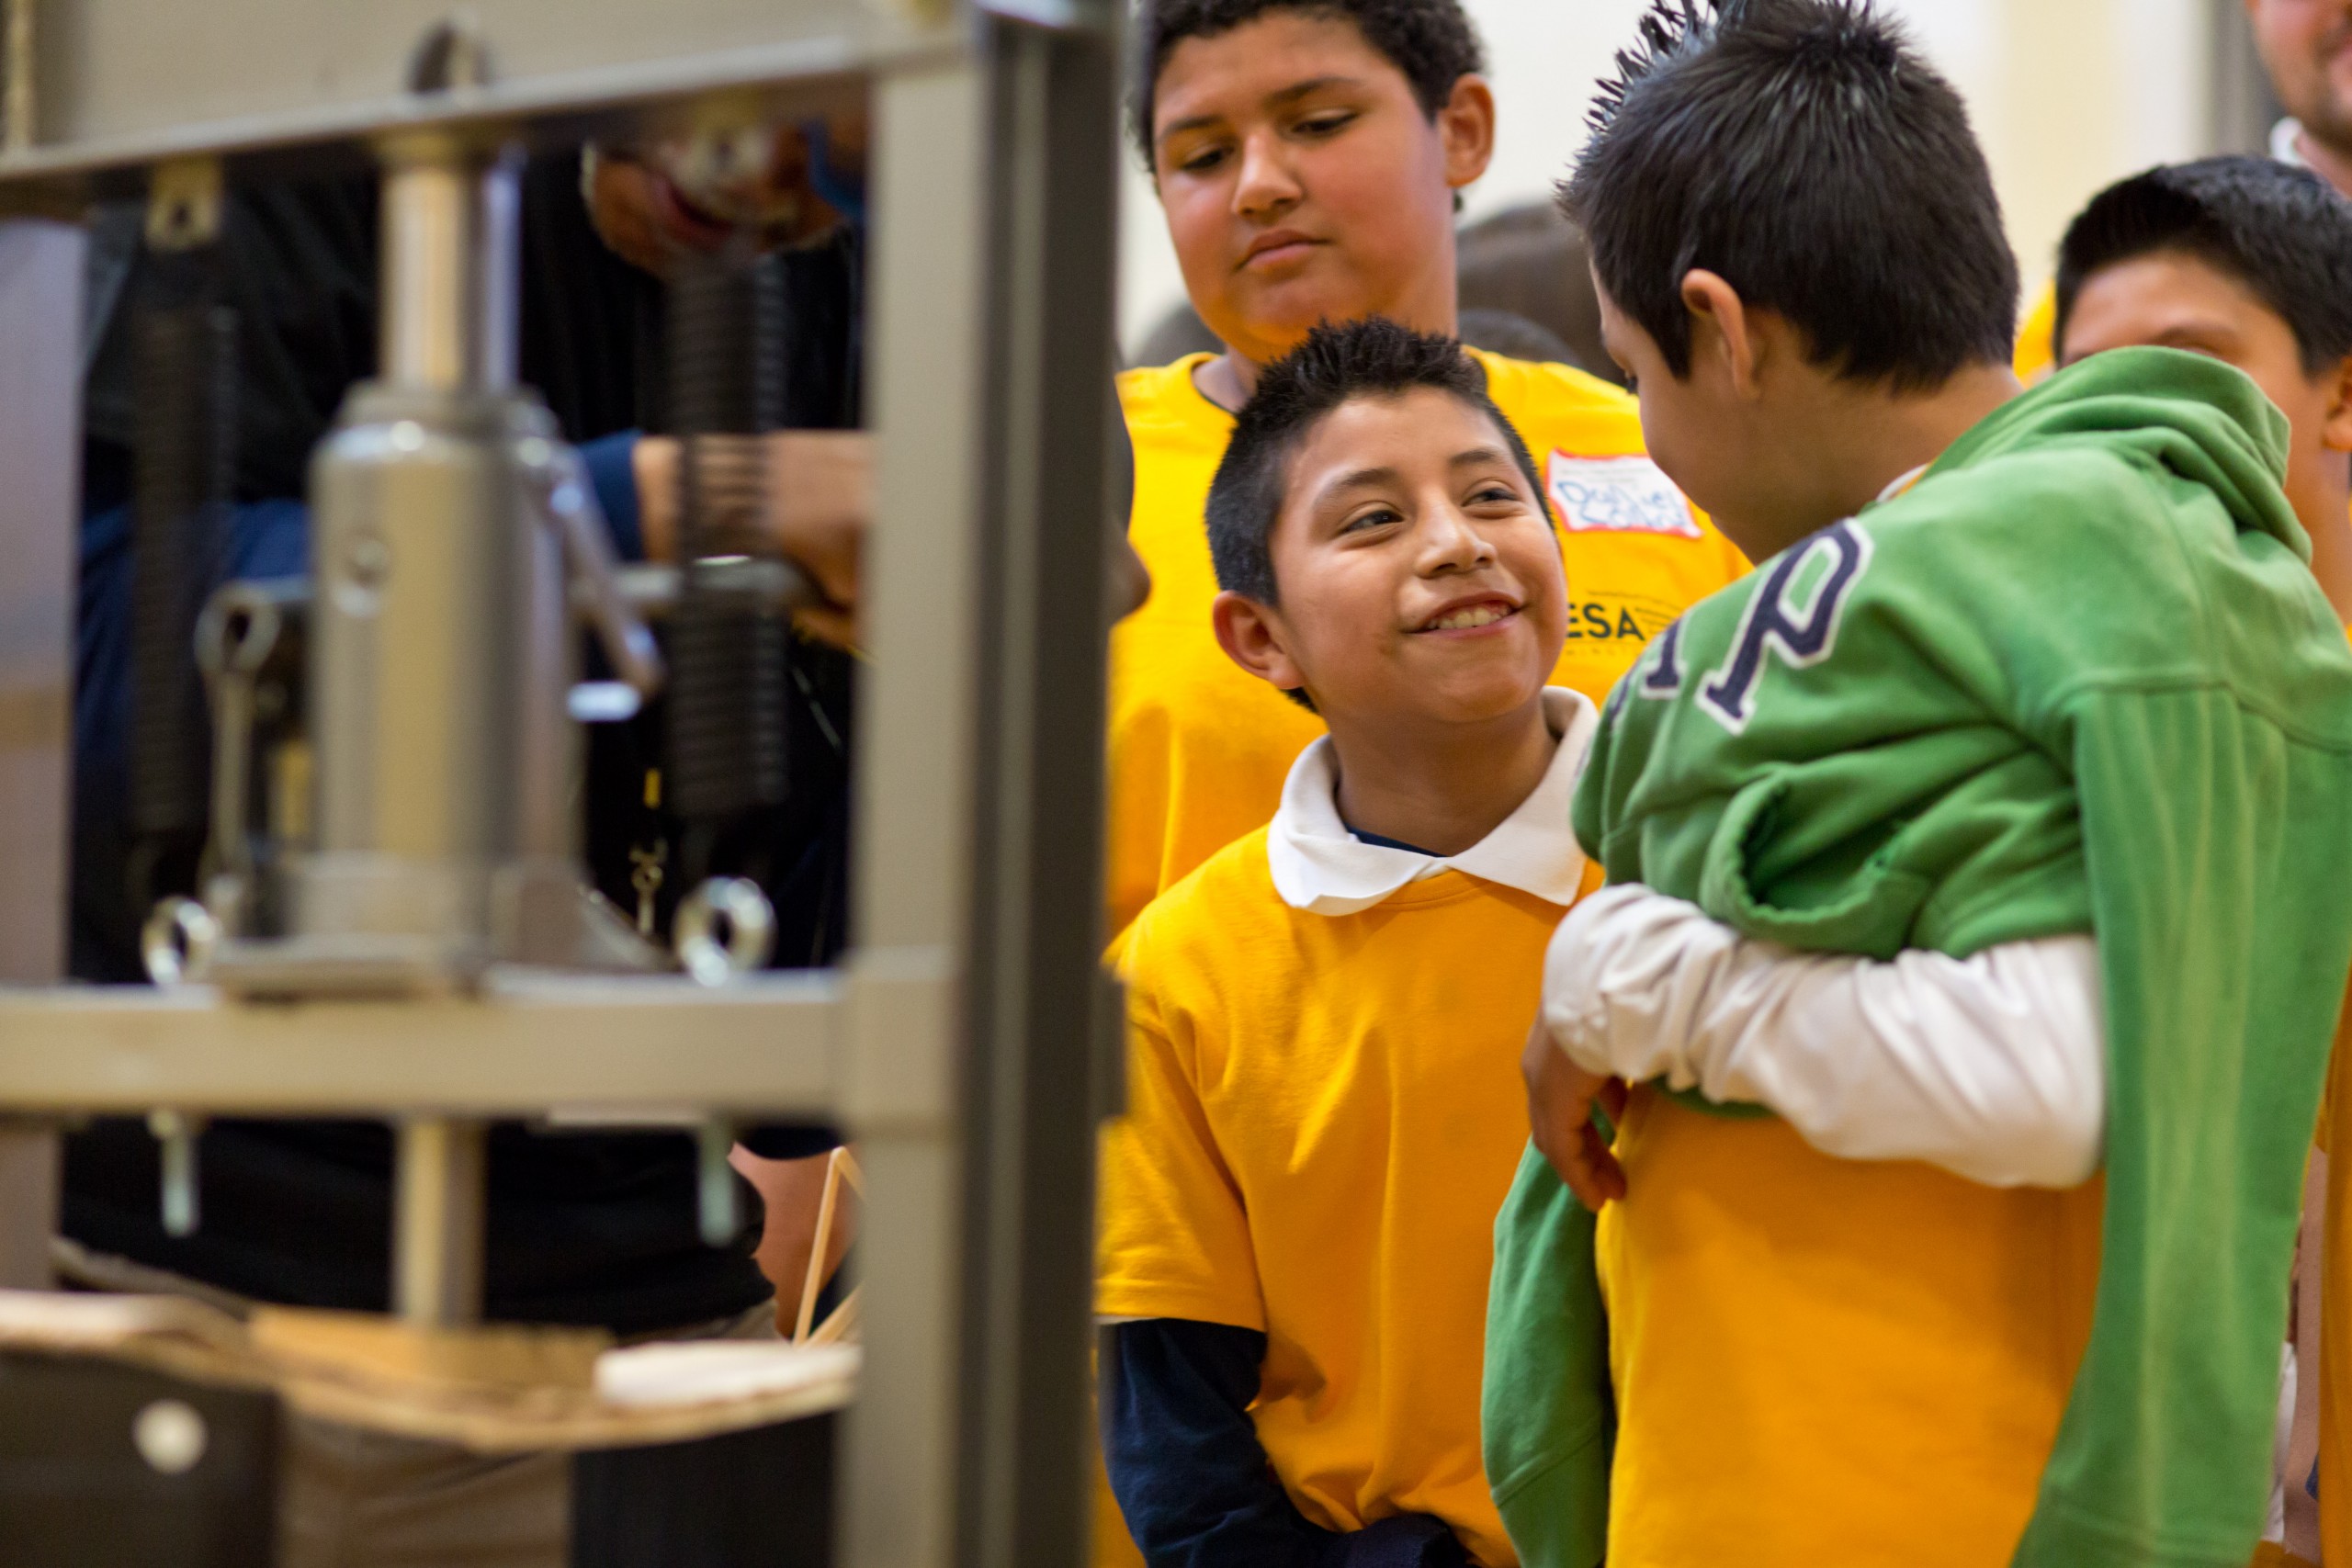 Denner Galindo, left, smiles at his teammate Antonio Reyes as the boys’ stick bridge is tested at PLU’s MESA Day event March 25. (Photo: John Froschauer / PLU)